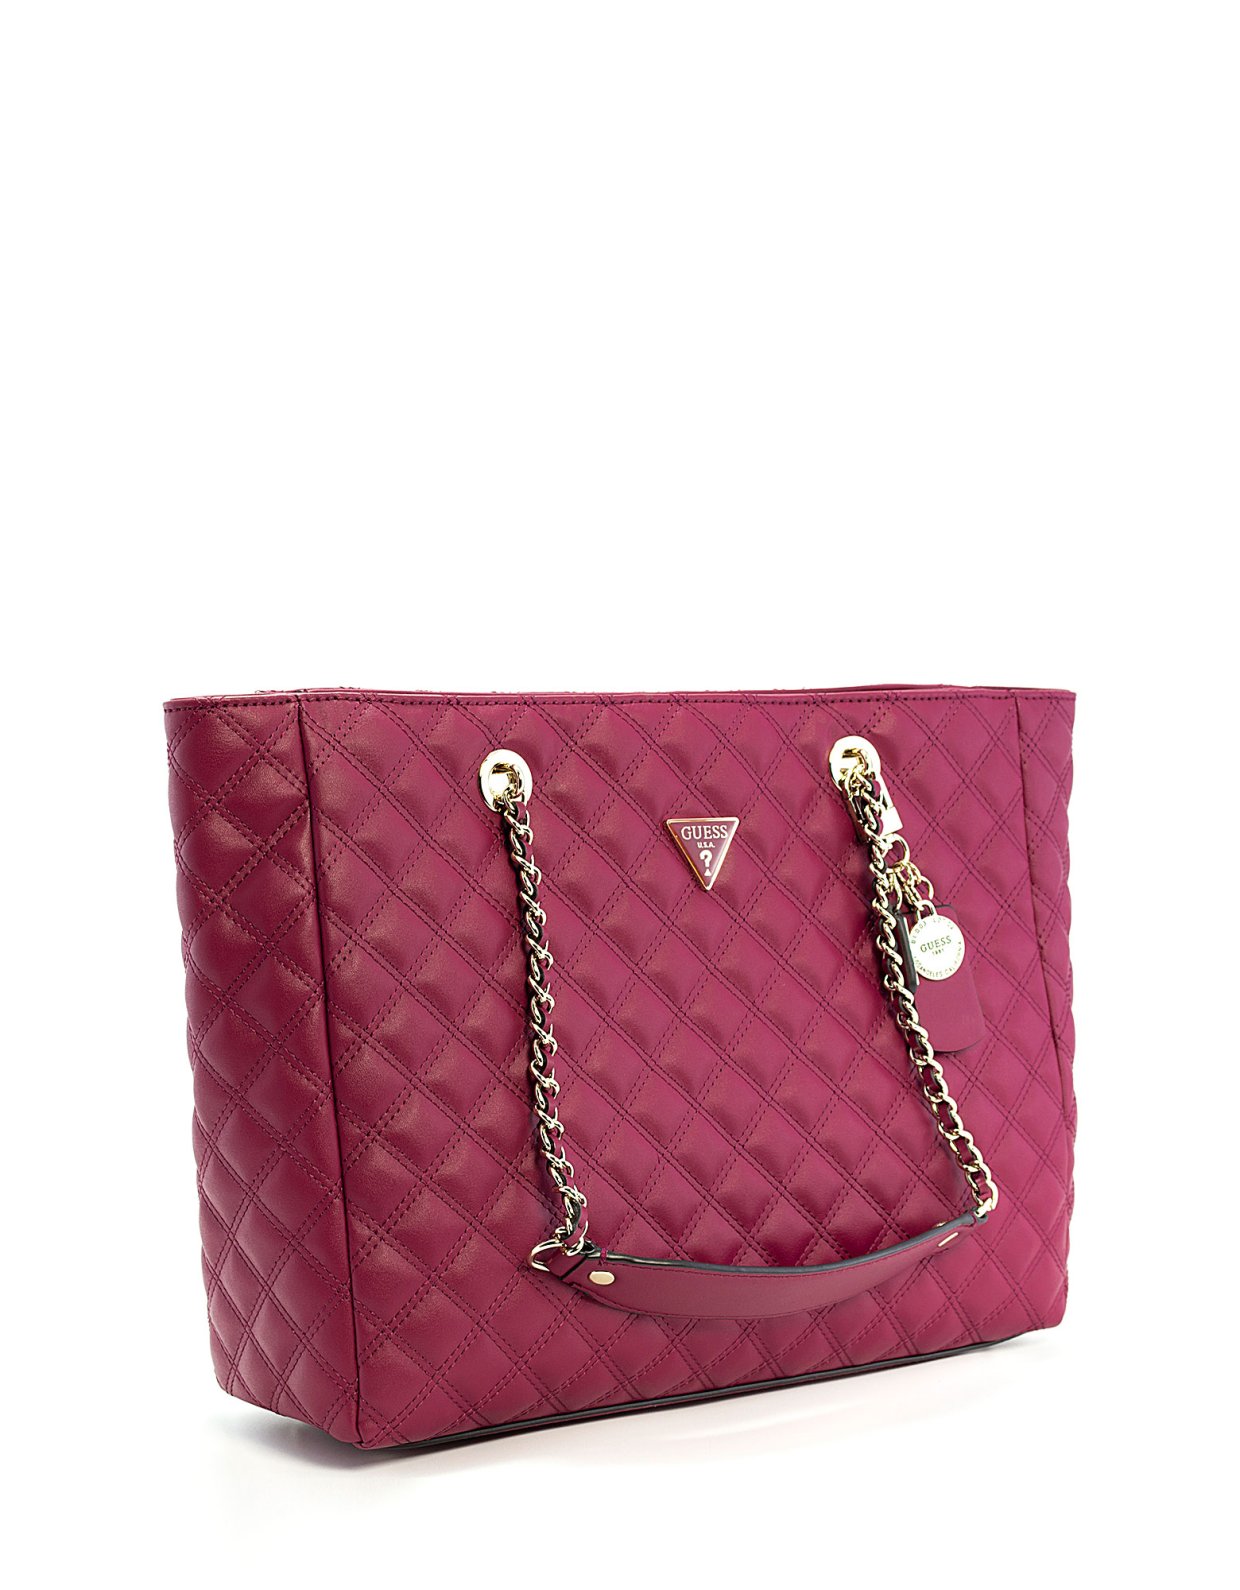 Guess Cessily quilted tote bag plum